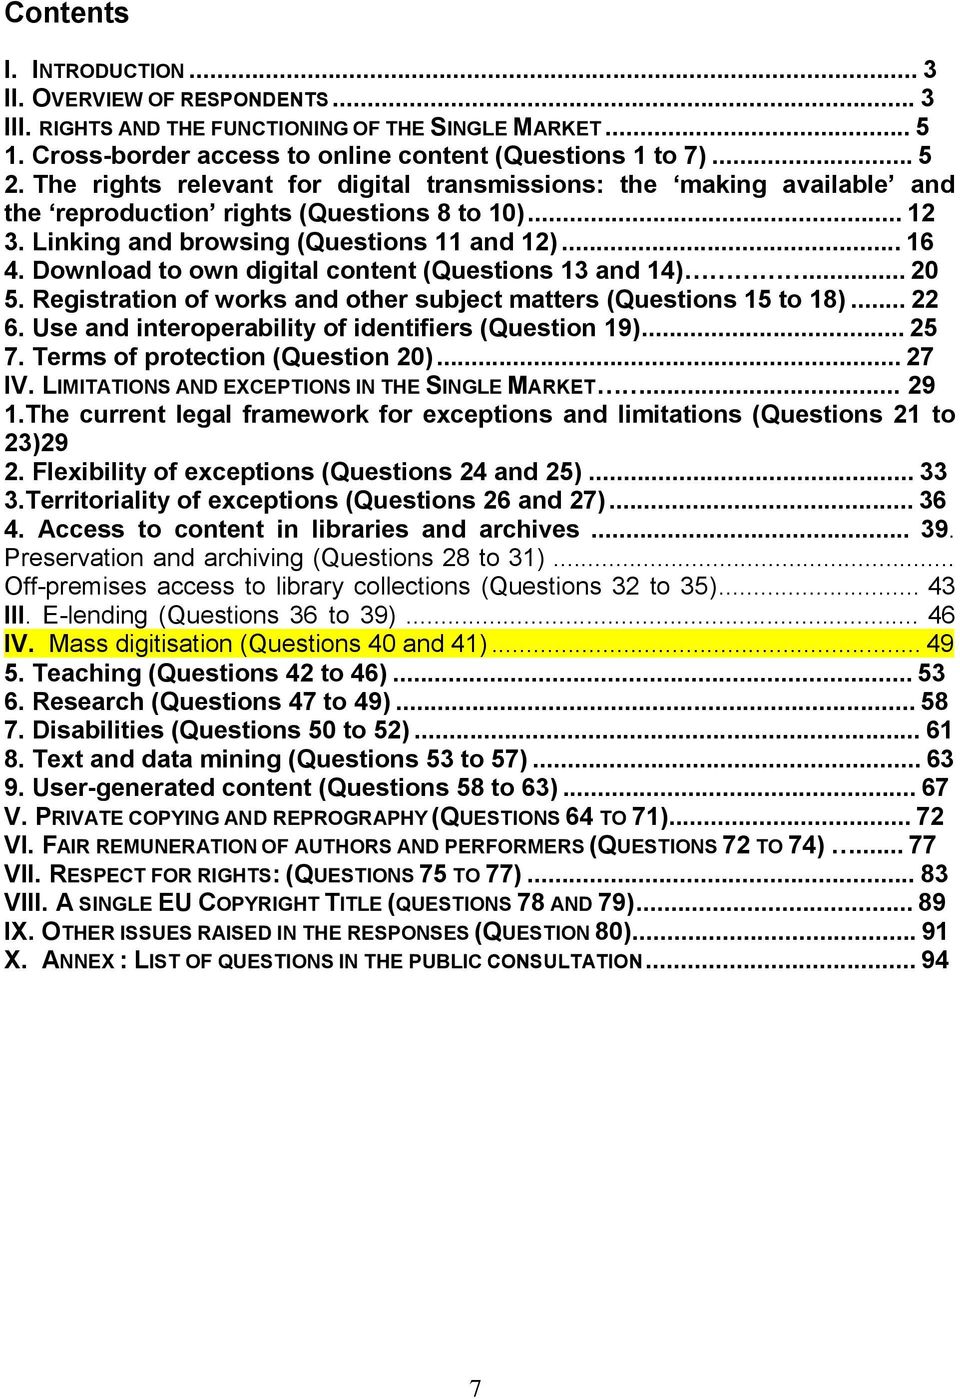 Download to own digital content (Questions 13 and 14)... 20 5. Registration of works and other subject matters (Questions 15 to 18)... 22 6. Use and interoperability of identifiers (Question 19).